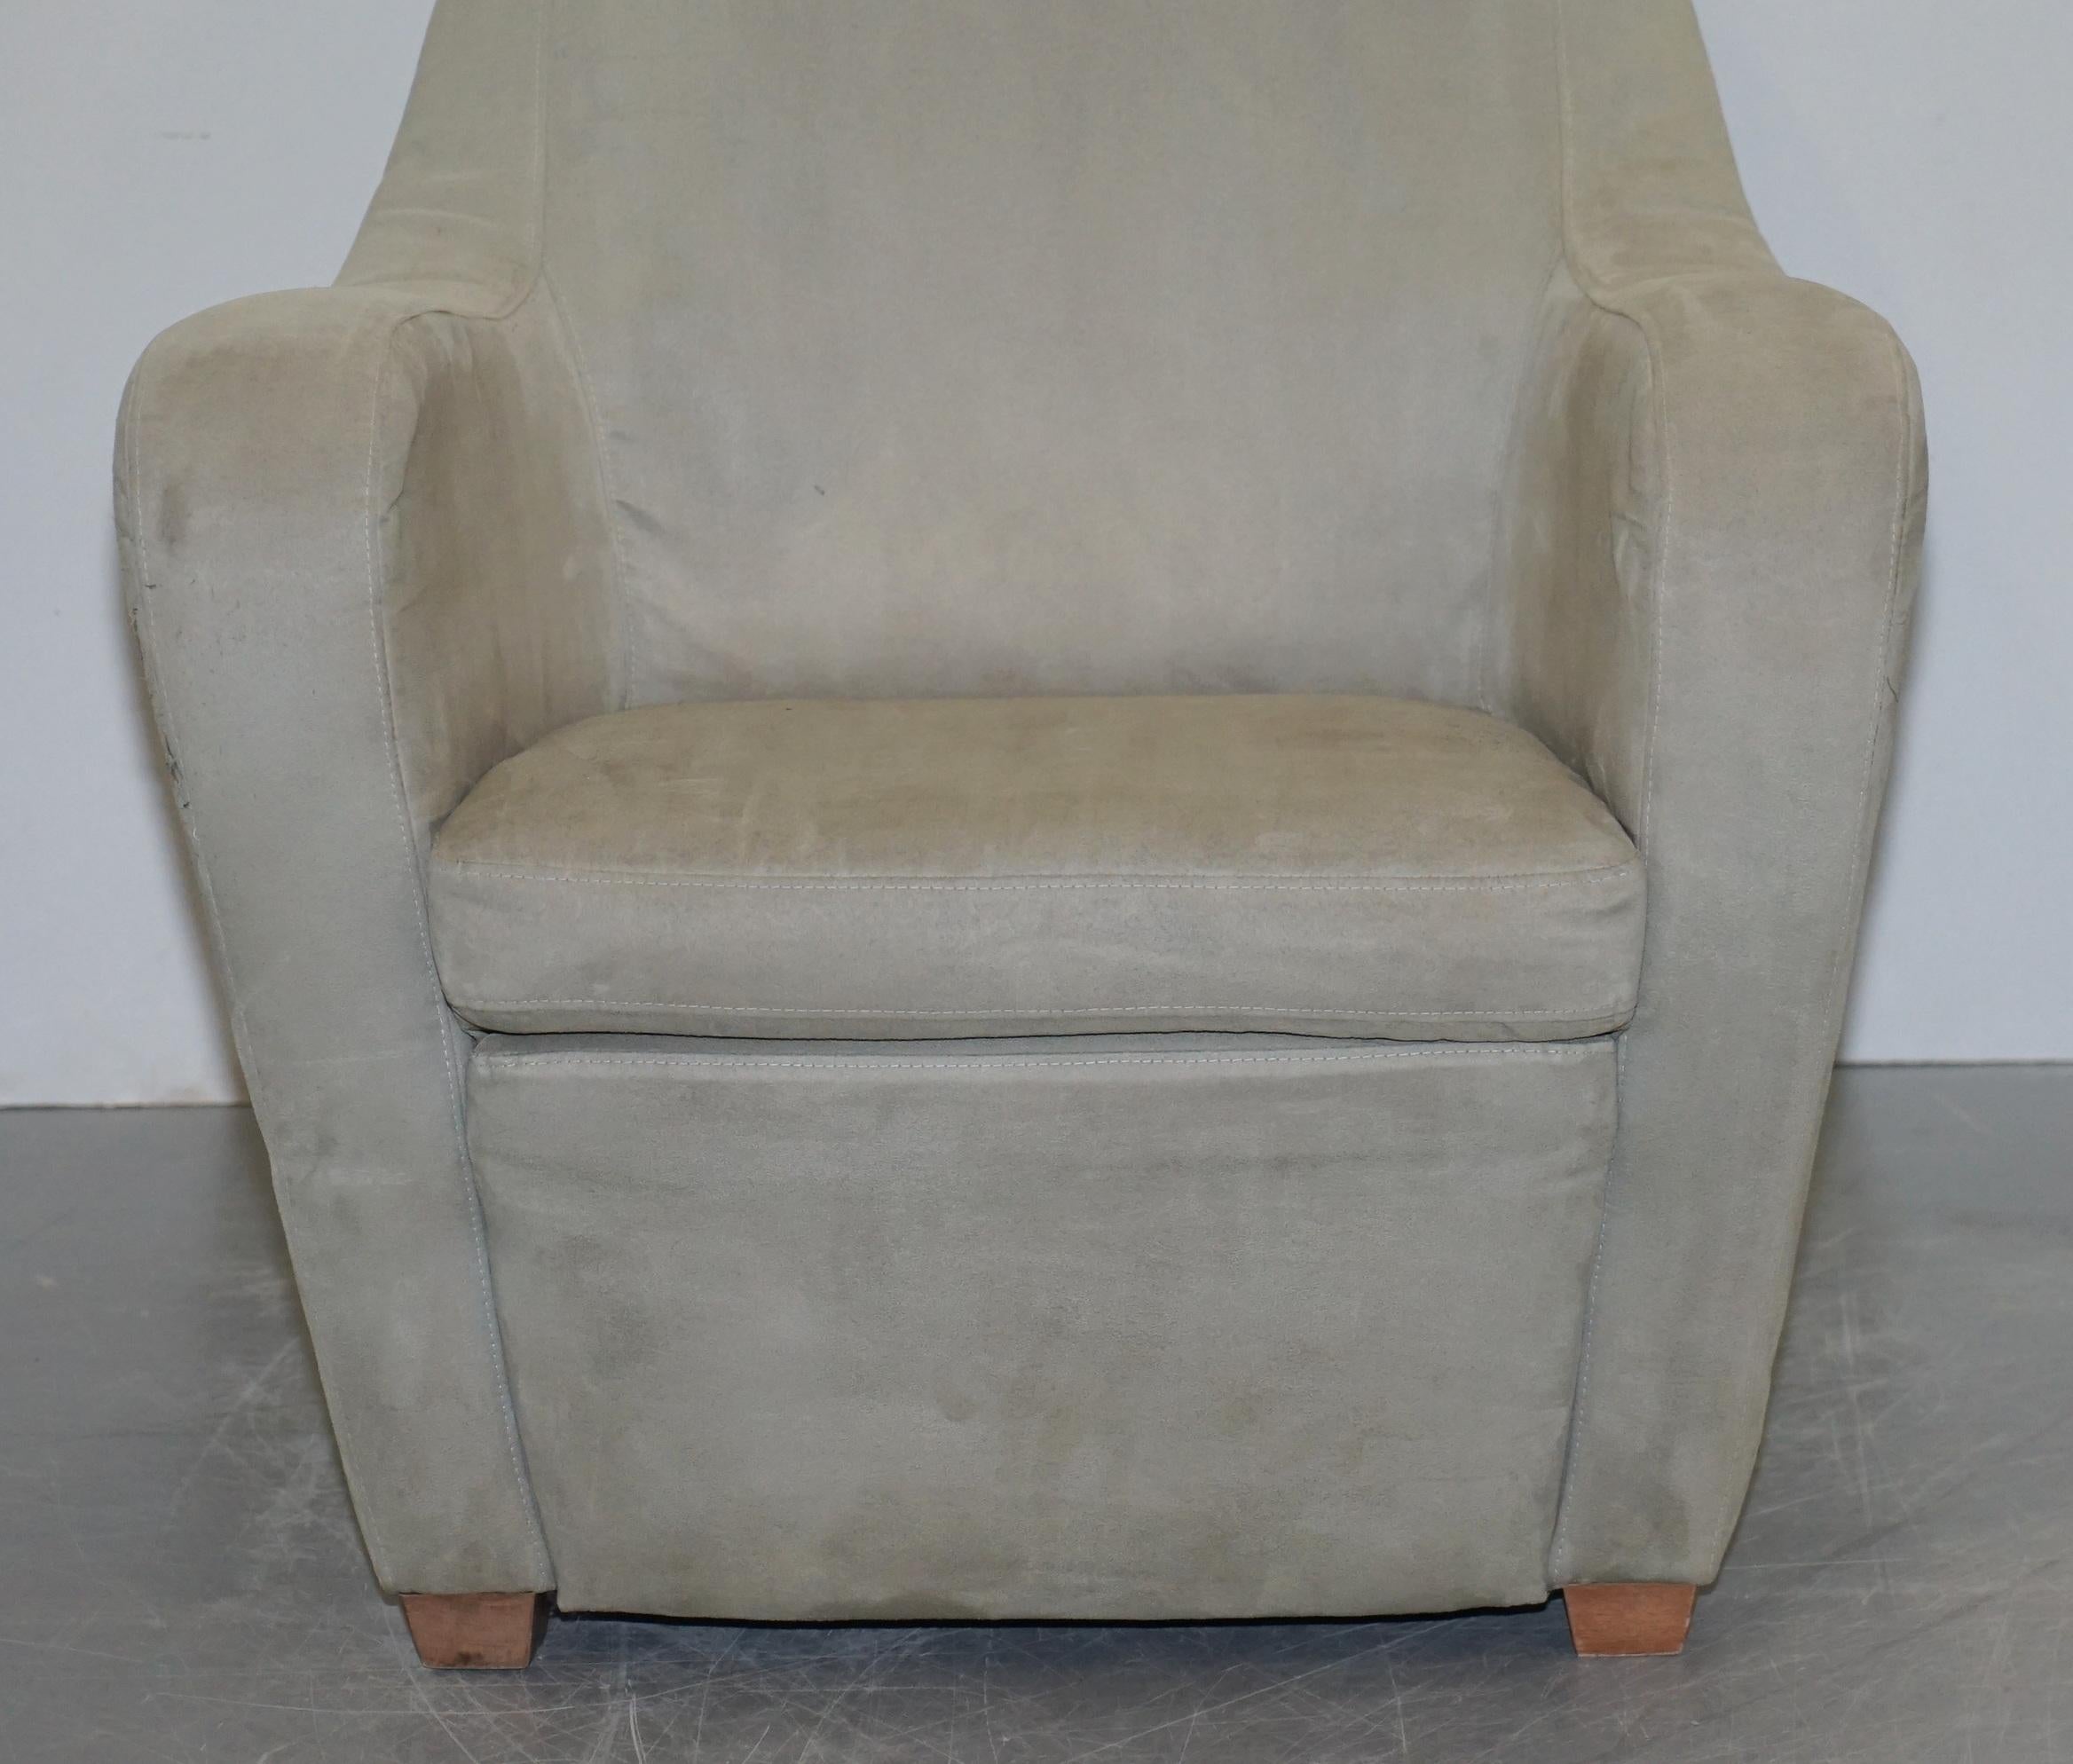 Natuzzi Made in Italy Suede Grey Upholstery Armchair Professionally Cleaned 3